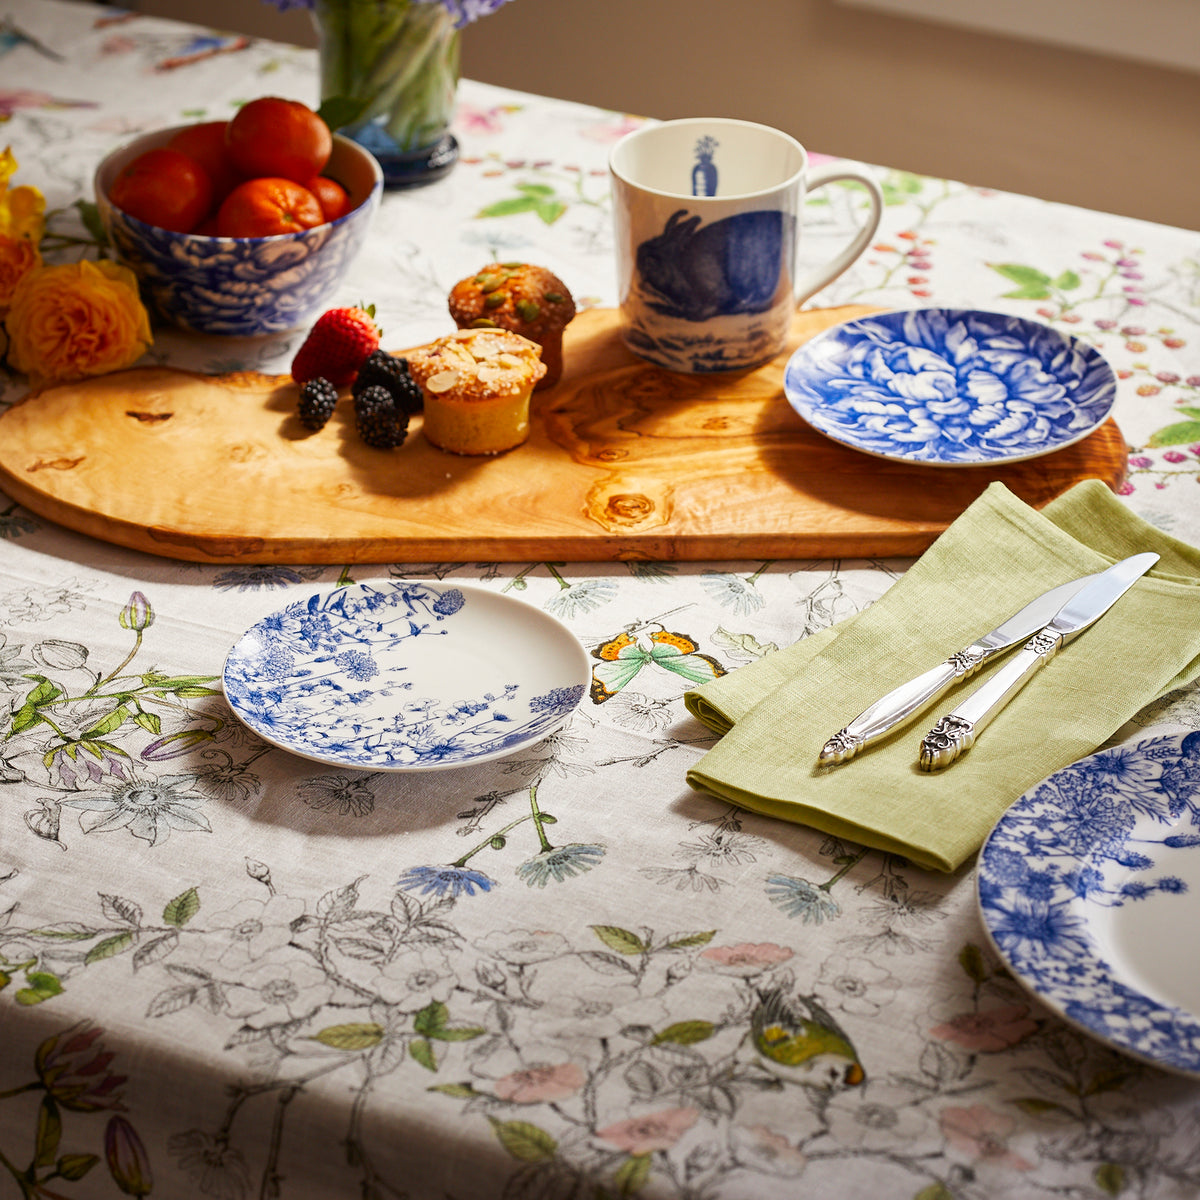 A floral tablecloth with a wooden board displaying muffins, berries, and persimmons. Nearby are a high-fired porcelain Bunnies Mug from Caskata Artisanal Home with a blue design, a matching plate, a yellow napkin, and a set of fork and knife.